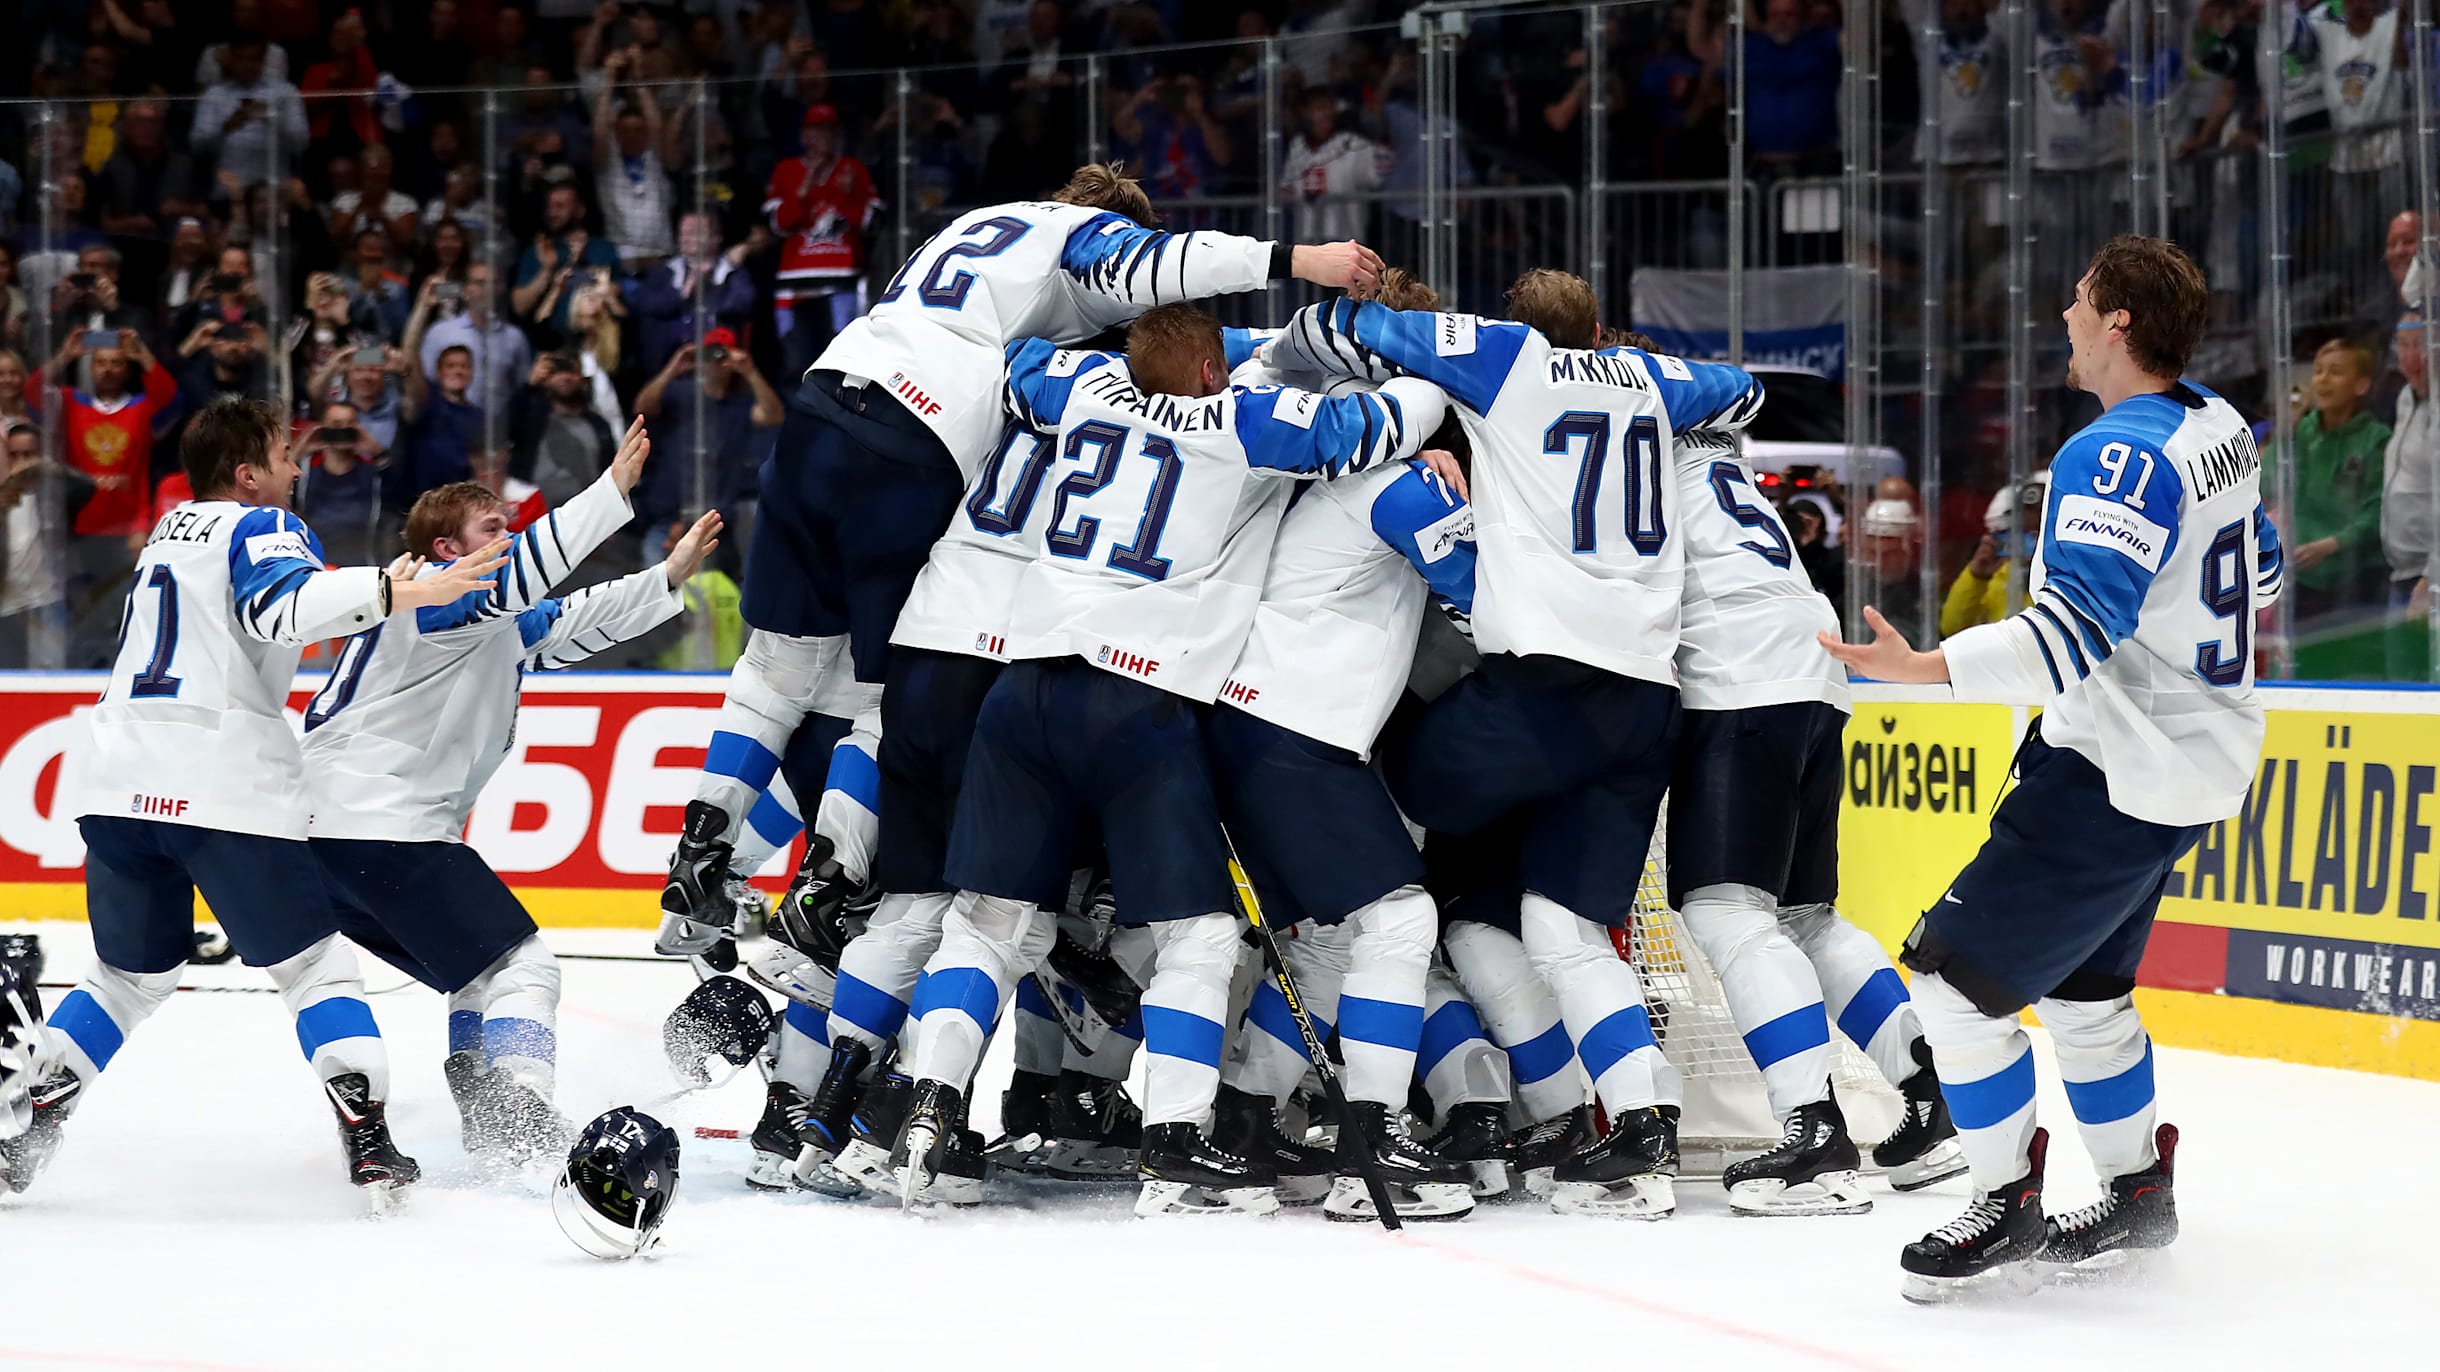 IIHF Ice Hockey World Championship 2023 Preview, schedule, stars involved, how to watch live